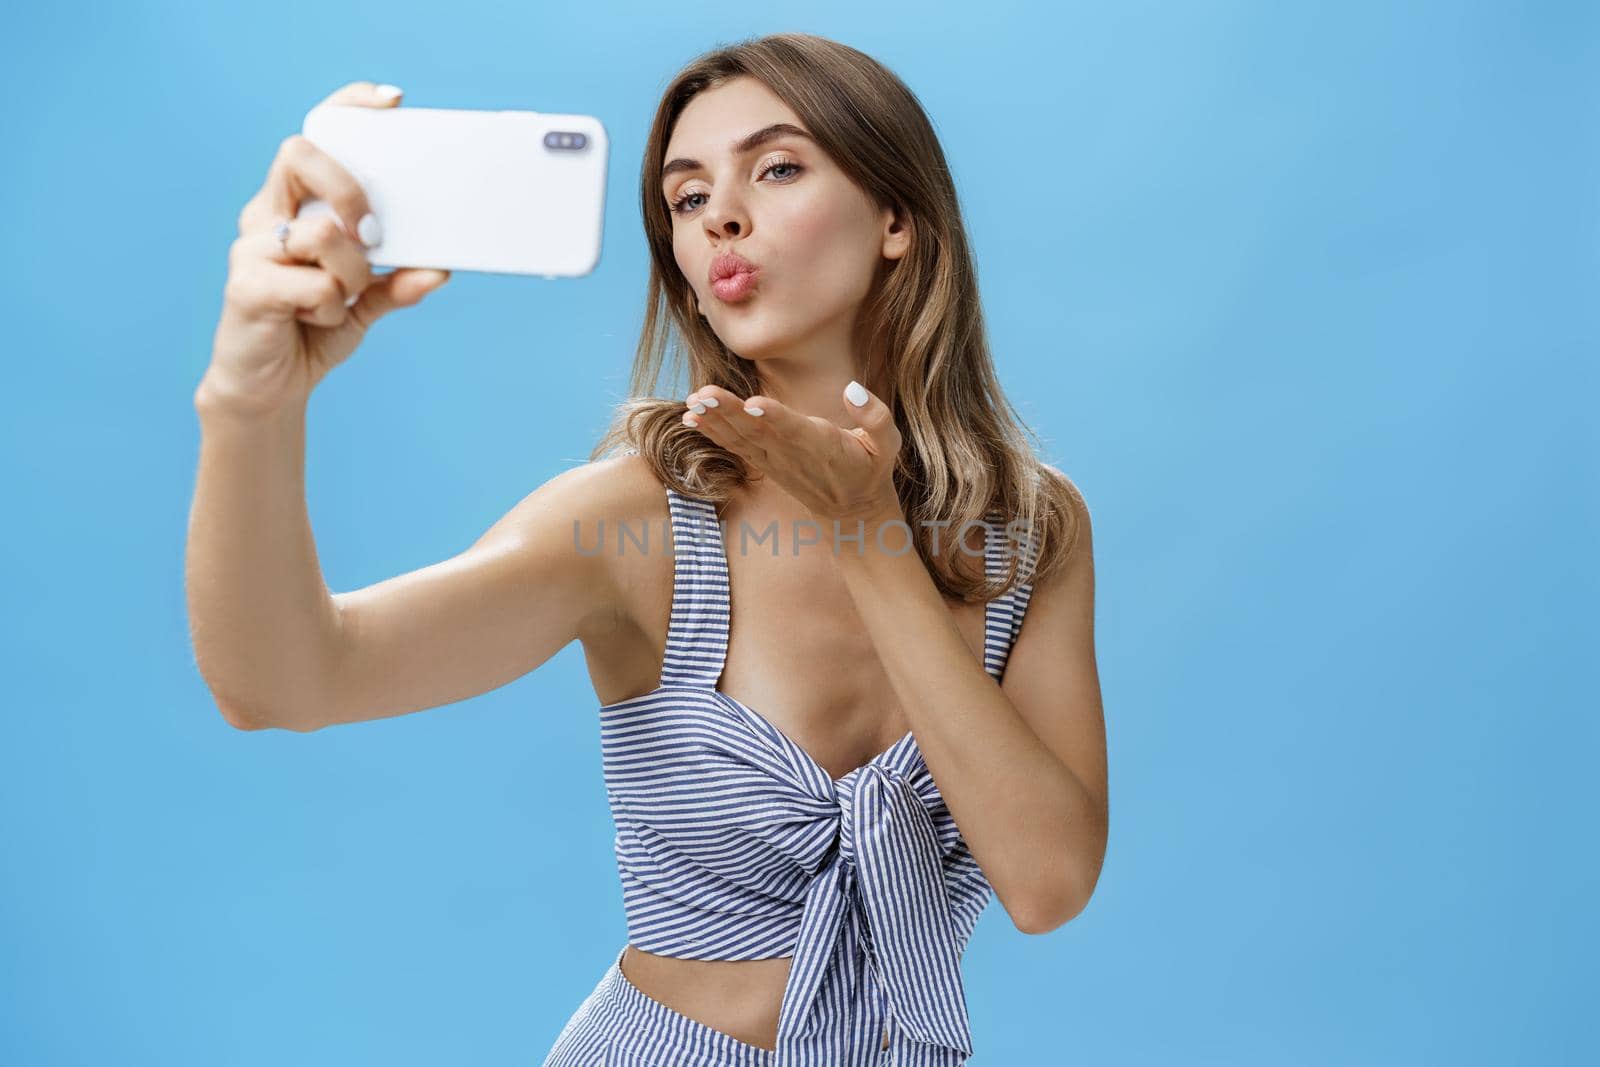 Outgoing and self-assured glamorous woman like taking pictures of herself holding smartphone making sensual and flirty selfie folding lips raising palm to send wind kiss at screen loving followers. Technology, lifestyle, social network concept